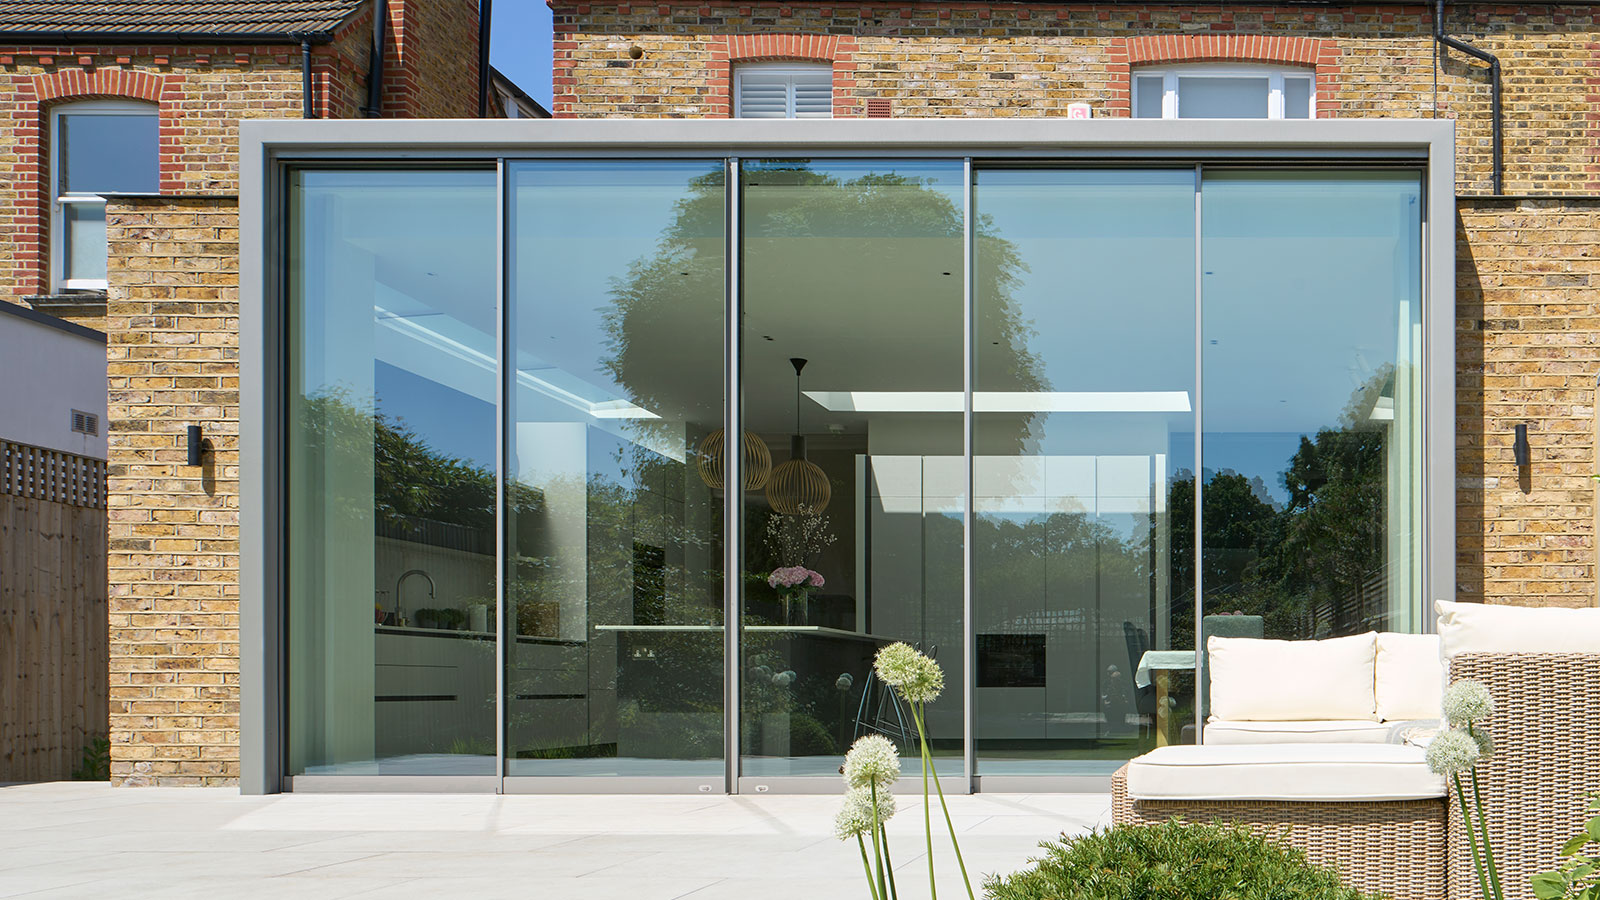 "London house extension Cox Architects indiaartndesign"